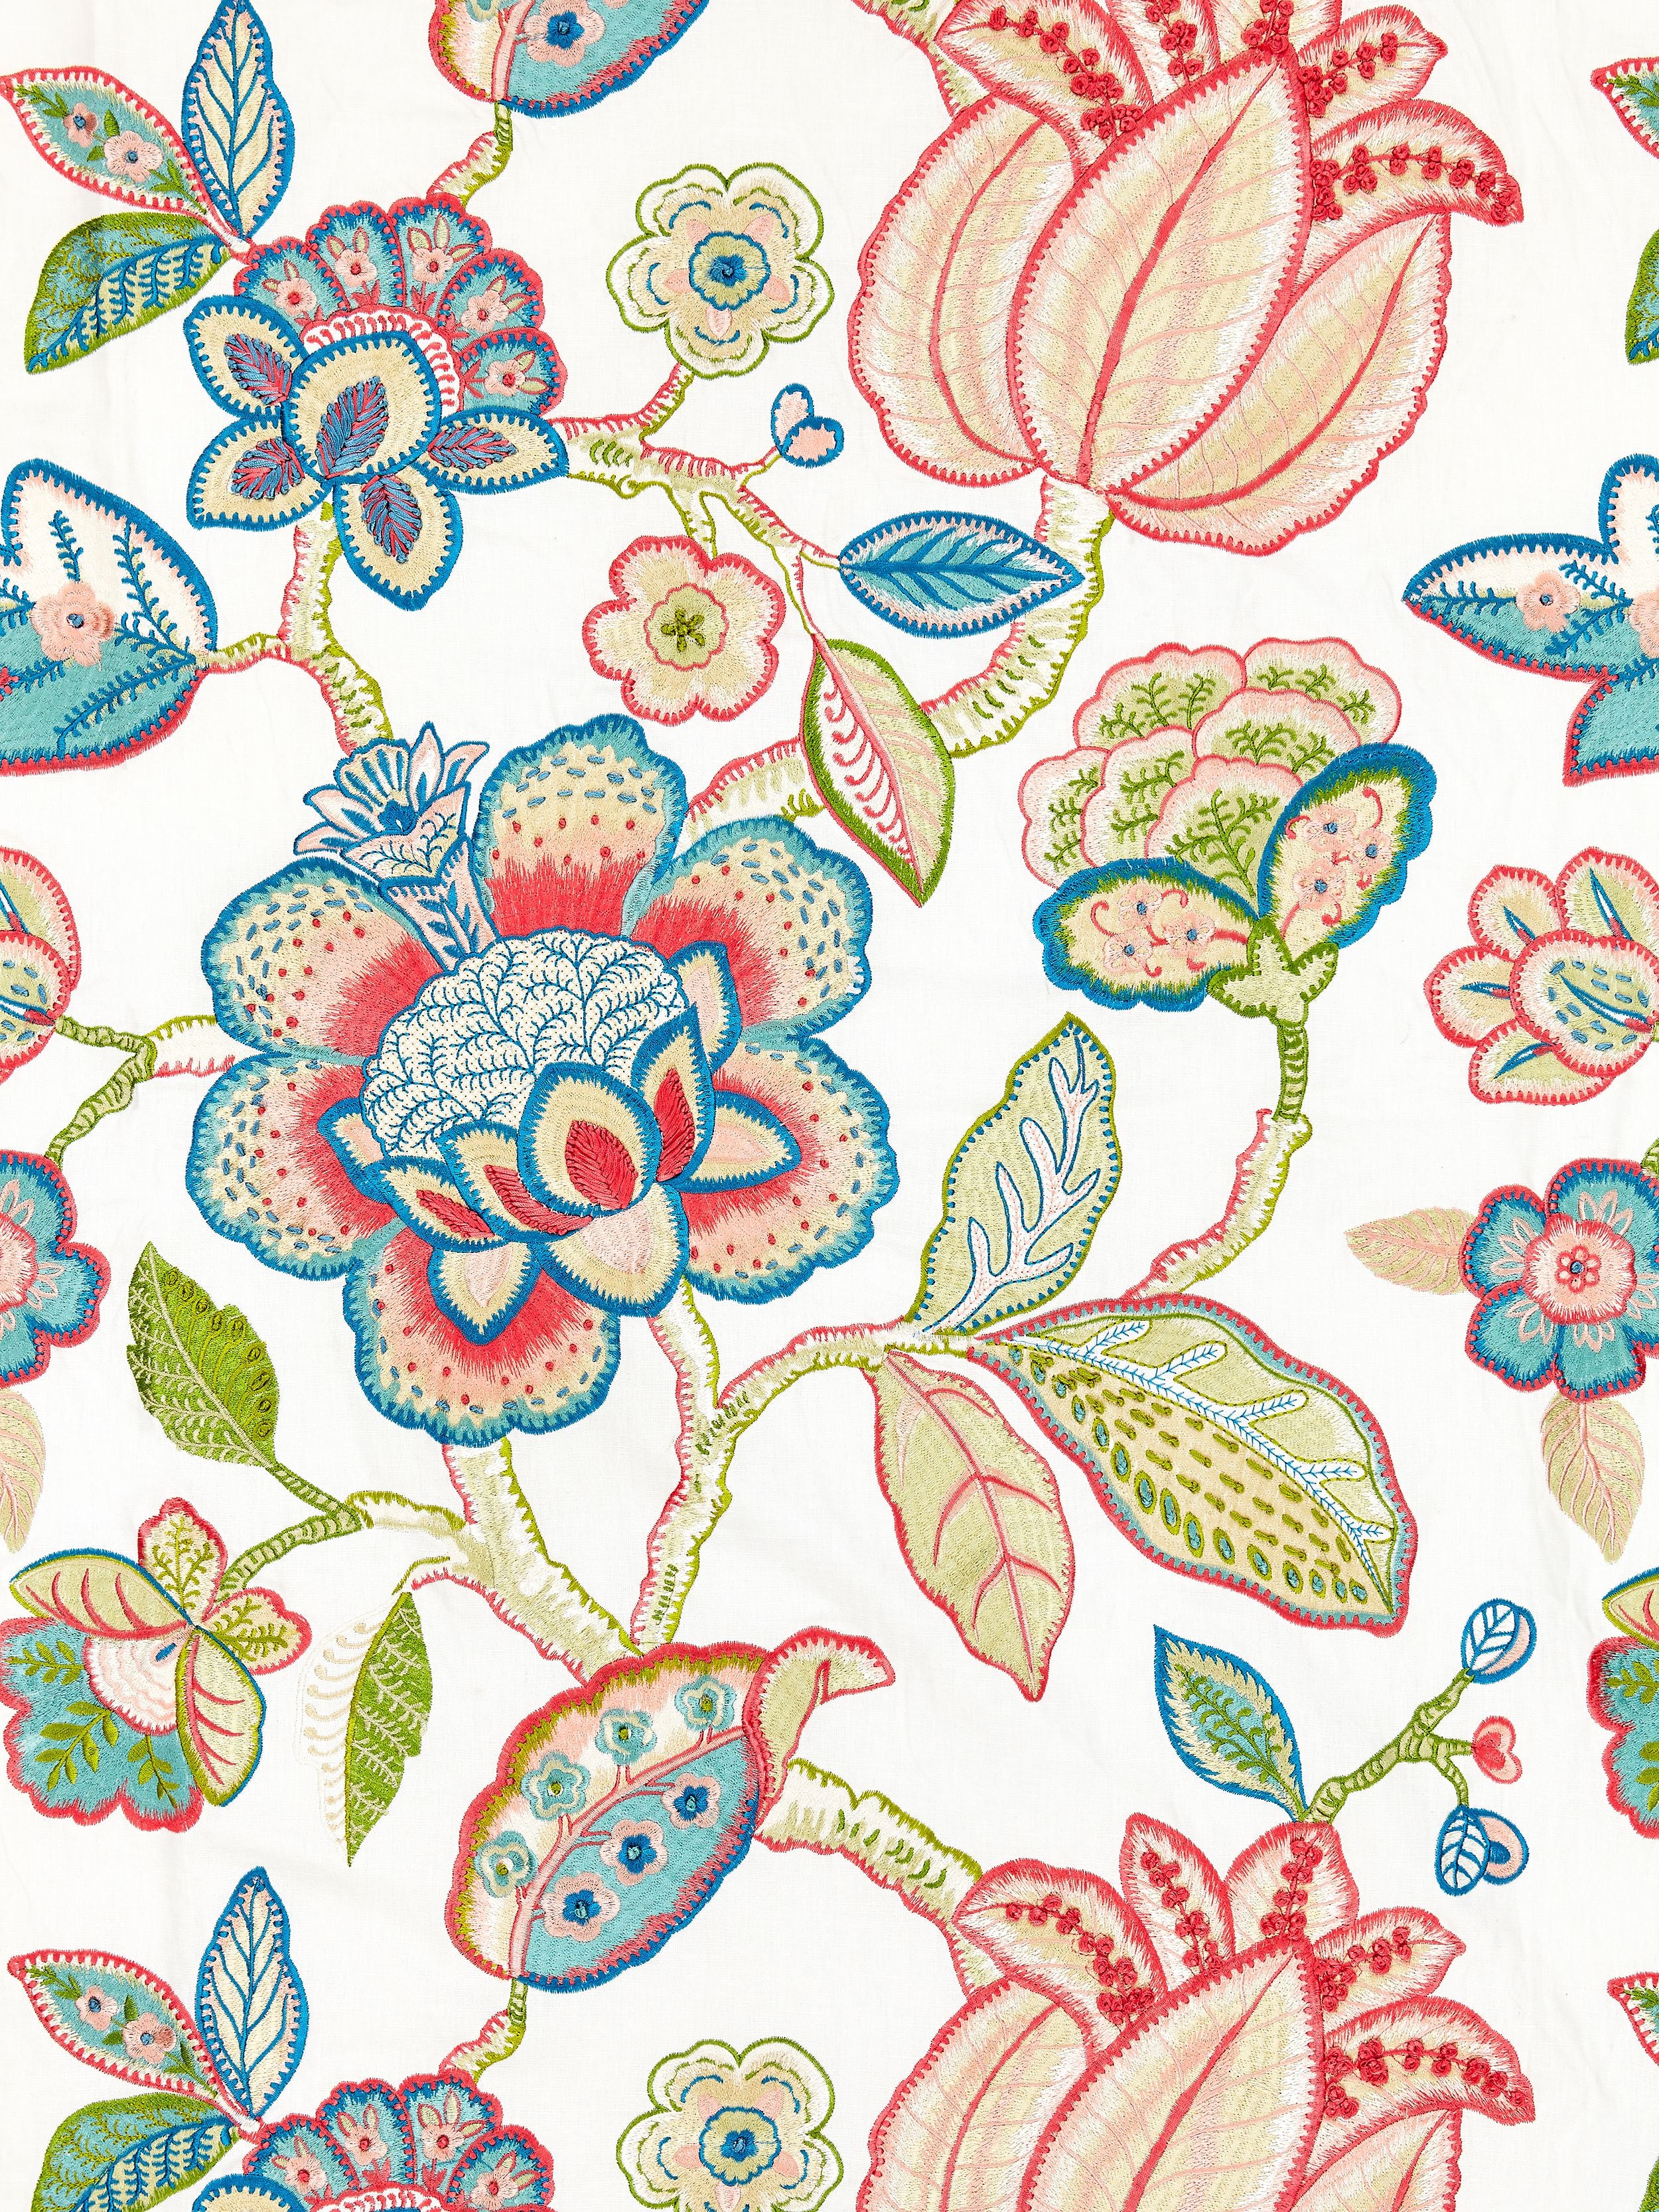 Coromandel Embroidery fabric in bloom color - pattern number SC 000127126 - by Scalamandre in the Scalamandre Fabrics Book 1 collection